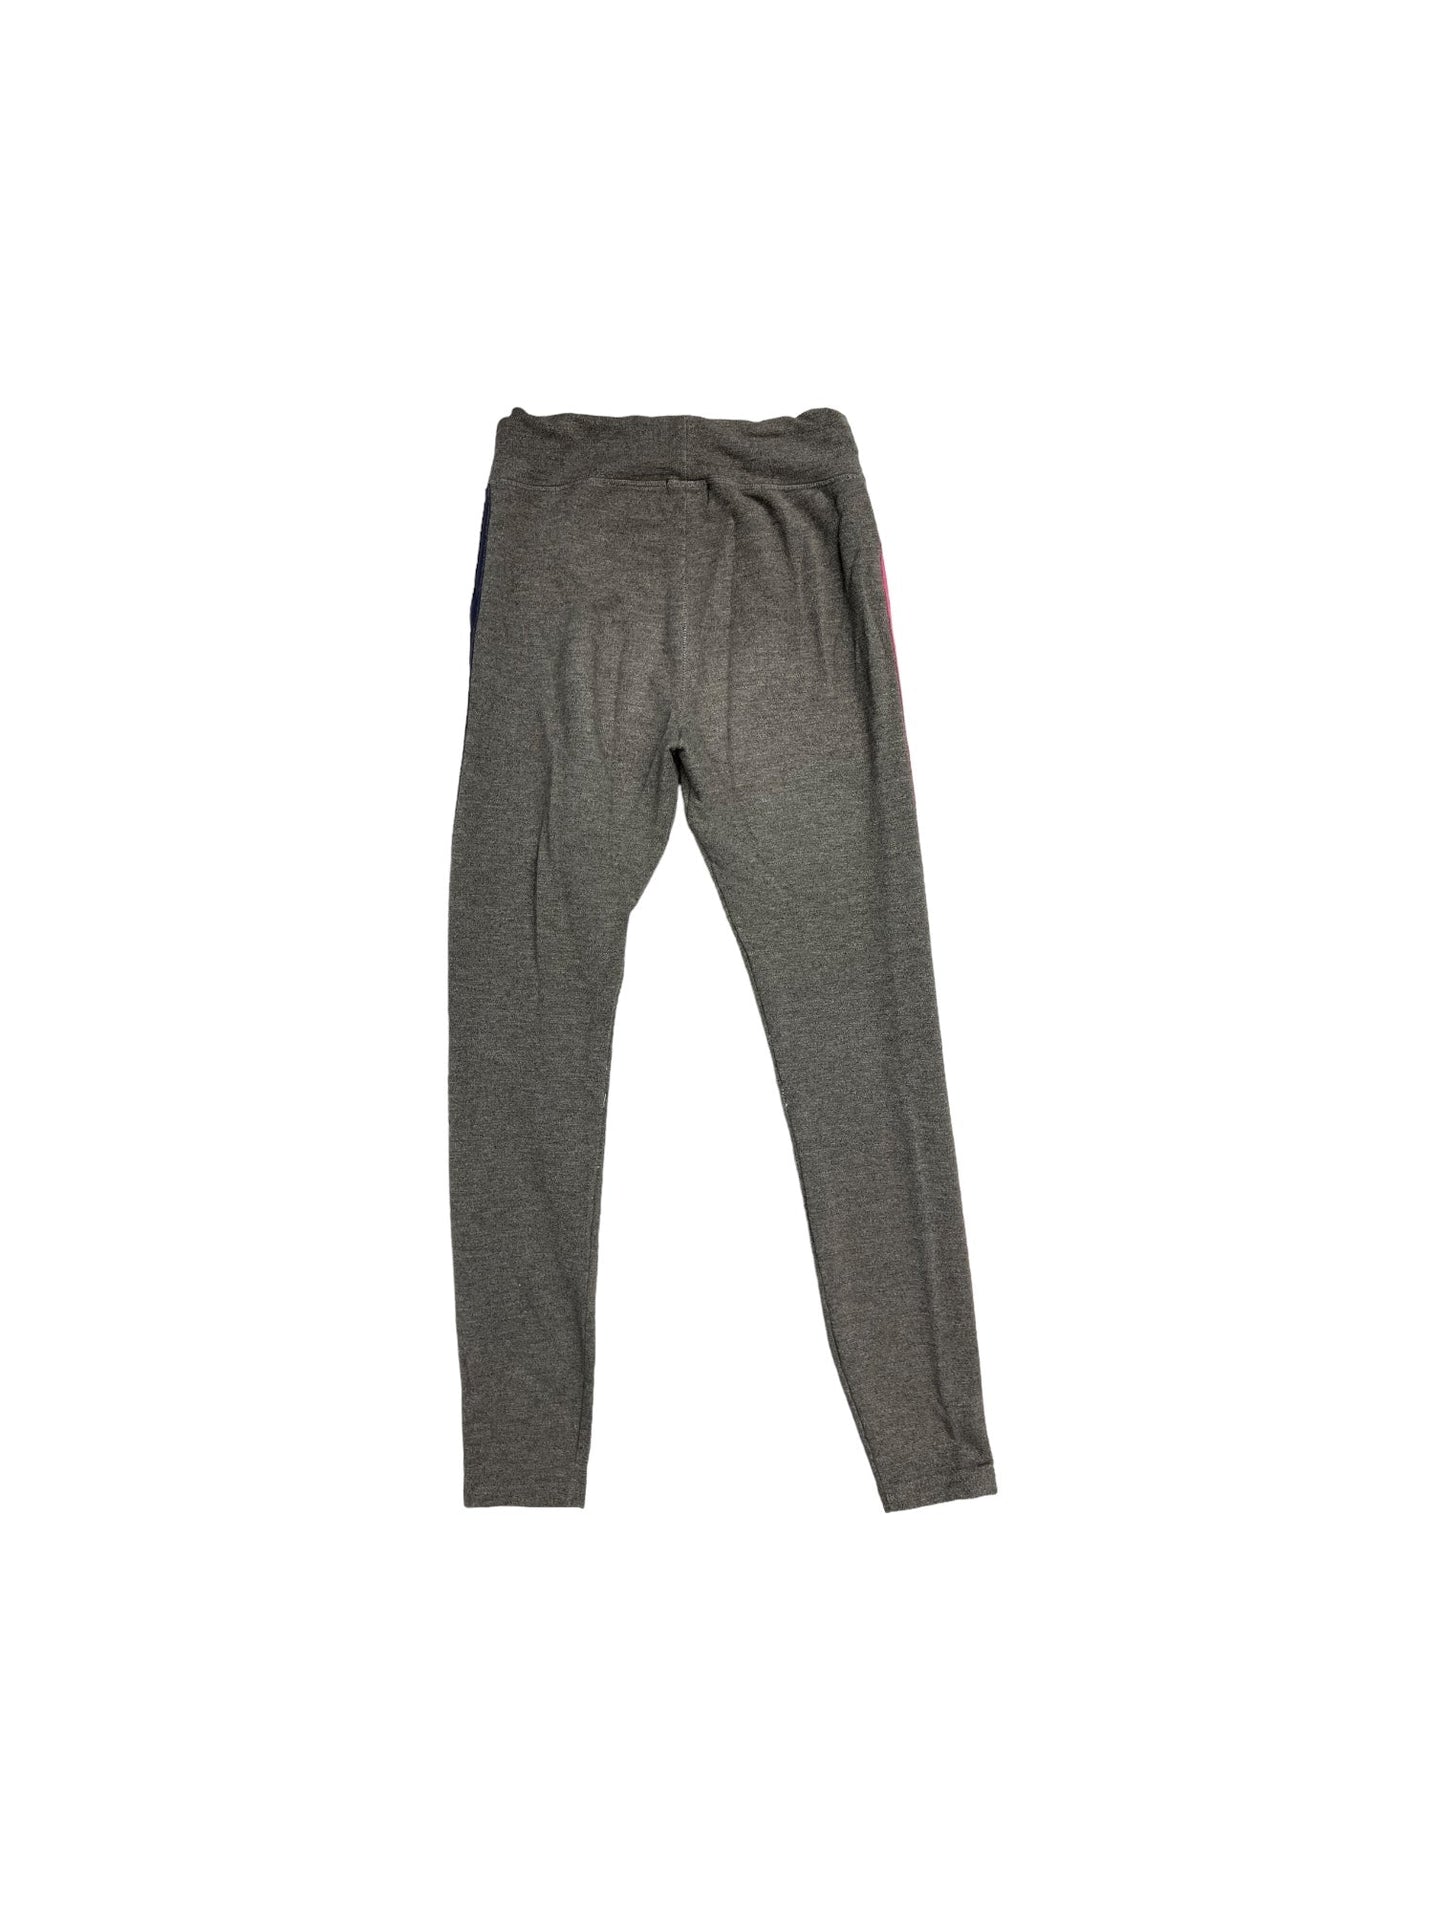 Athletic Pants By Sundry  Size: S